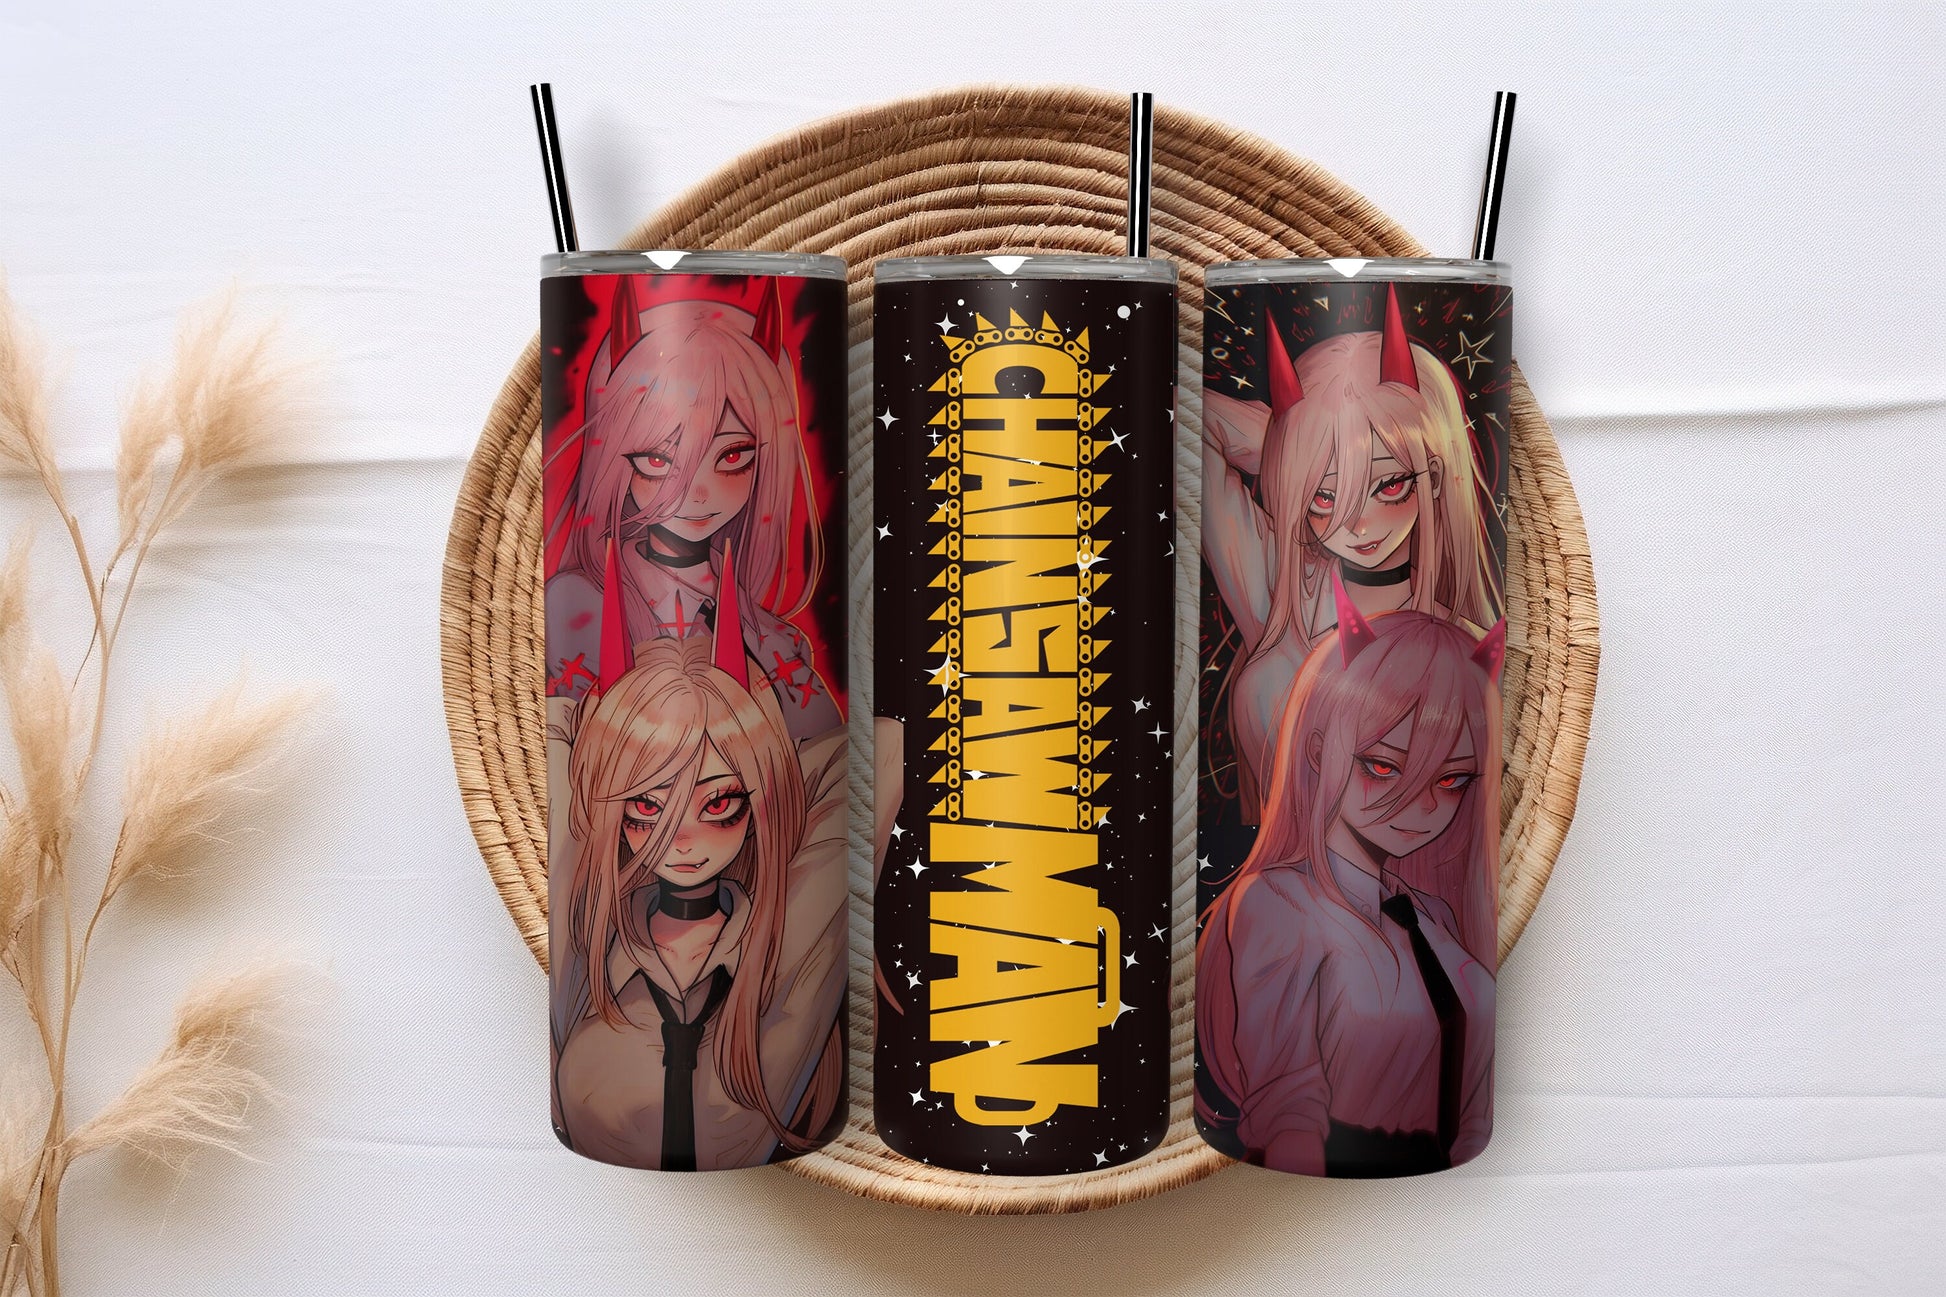 Dynamic Fiend 20 oz Skinny Tumbler - Manga-Inspired Fierce Character Design - Insulated Cup with Chainsaw Motif